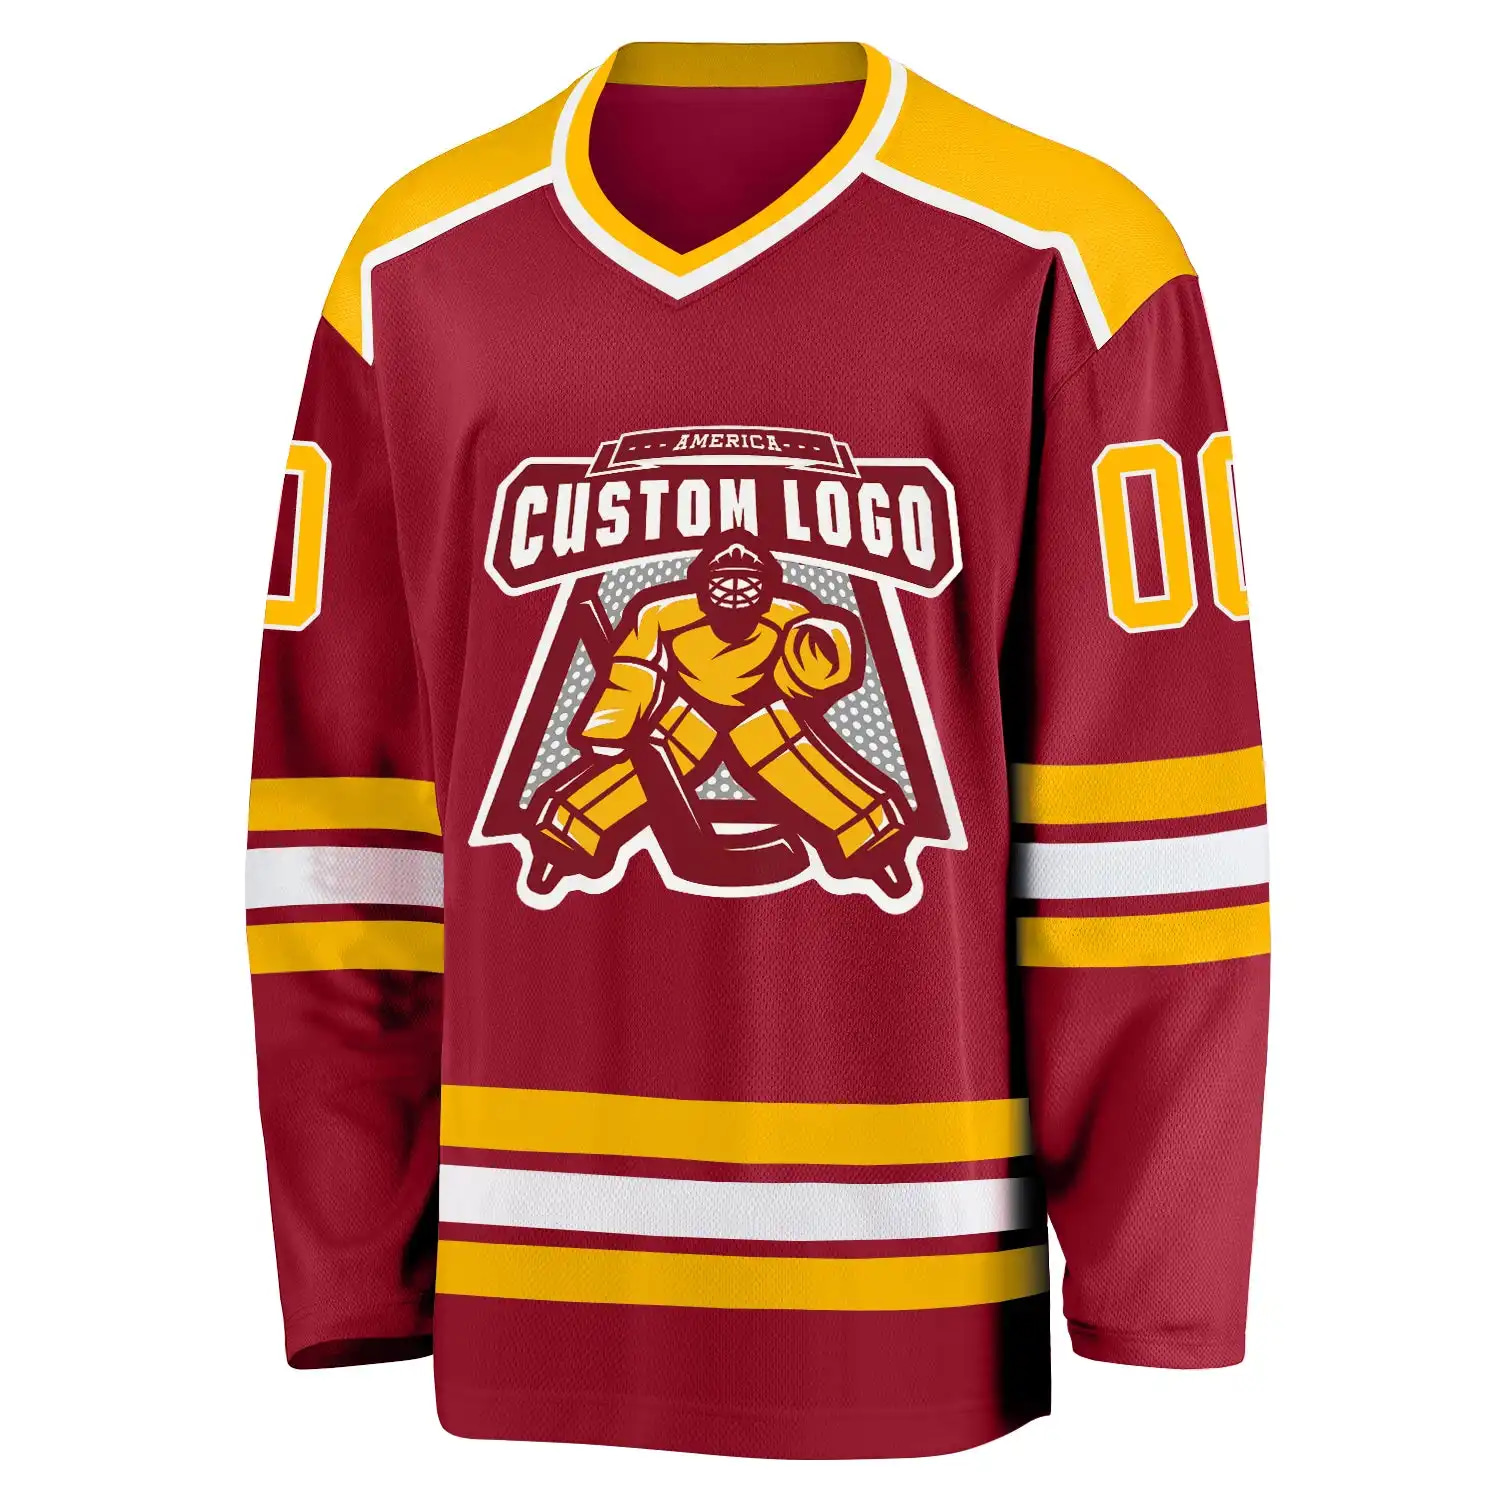 Inktee Store - Stitched And Print Maroon Gold-White Hockey Jersey Custom Image